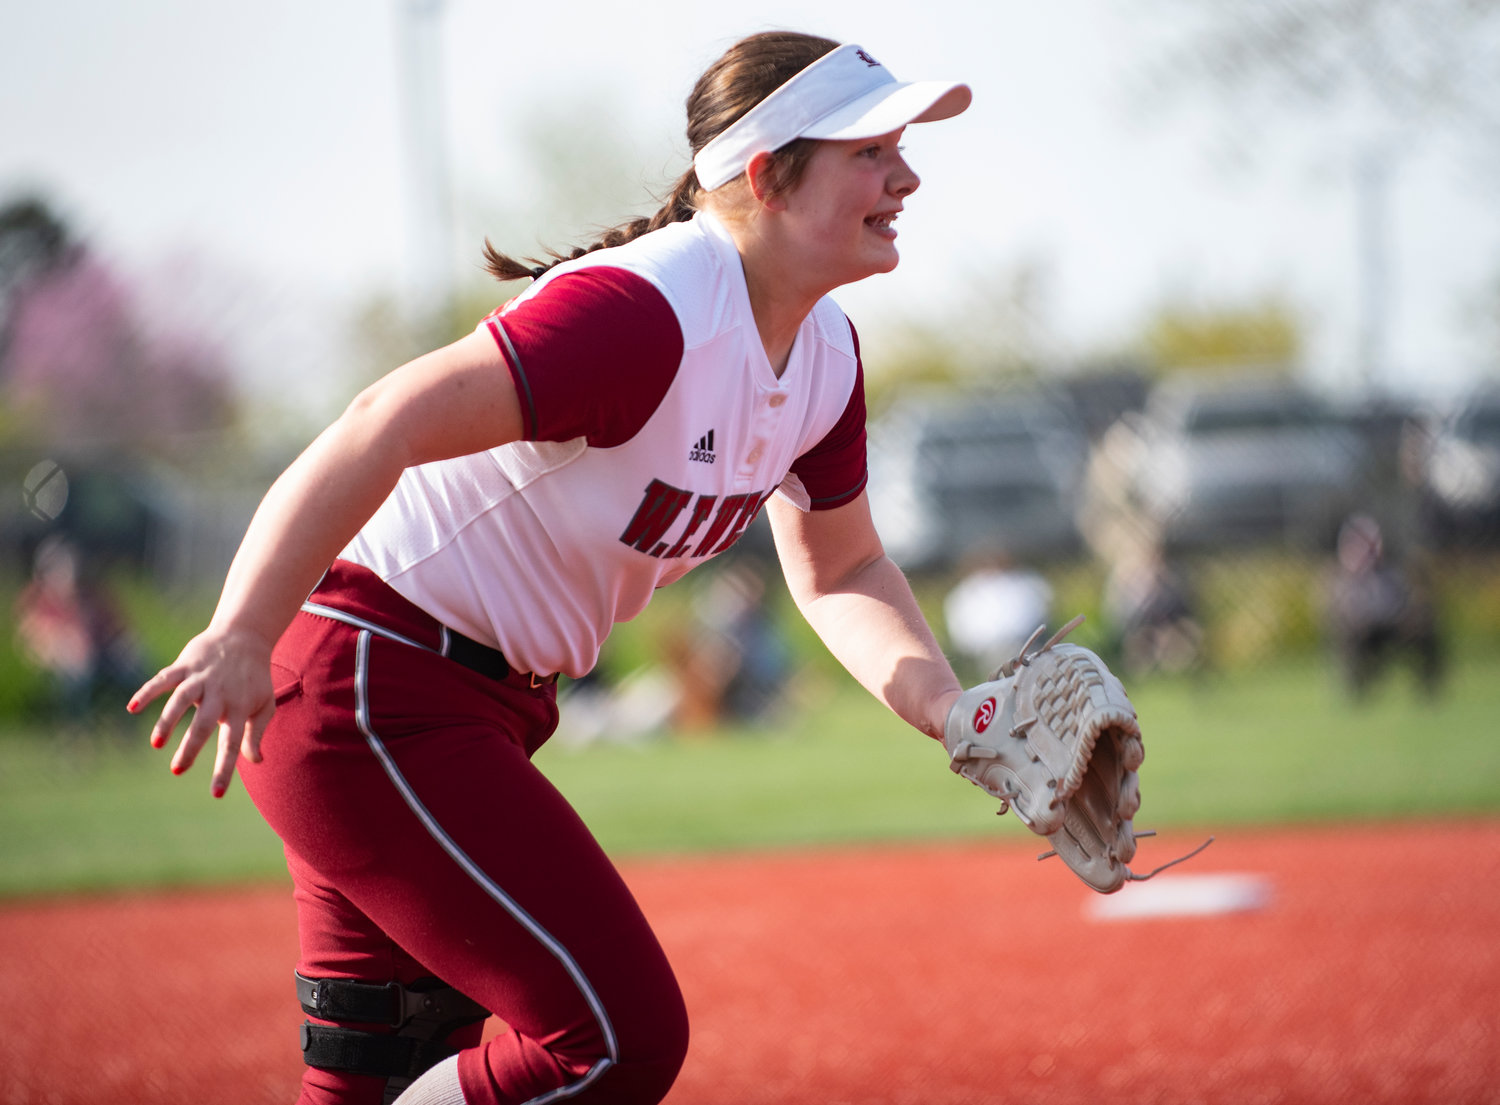 W.F. West sophomore third baseman Savannah Hawkins chases down a Tumwater bunt on Wednesday.